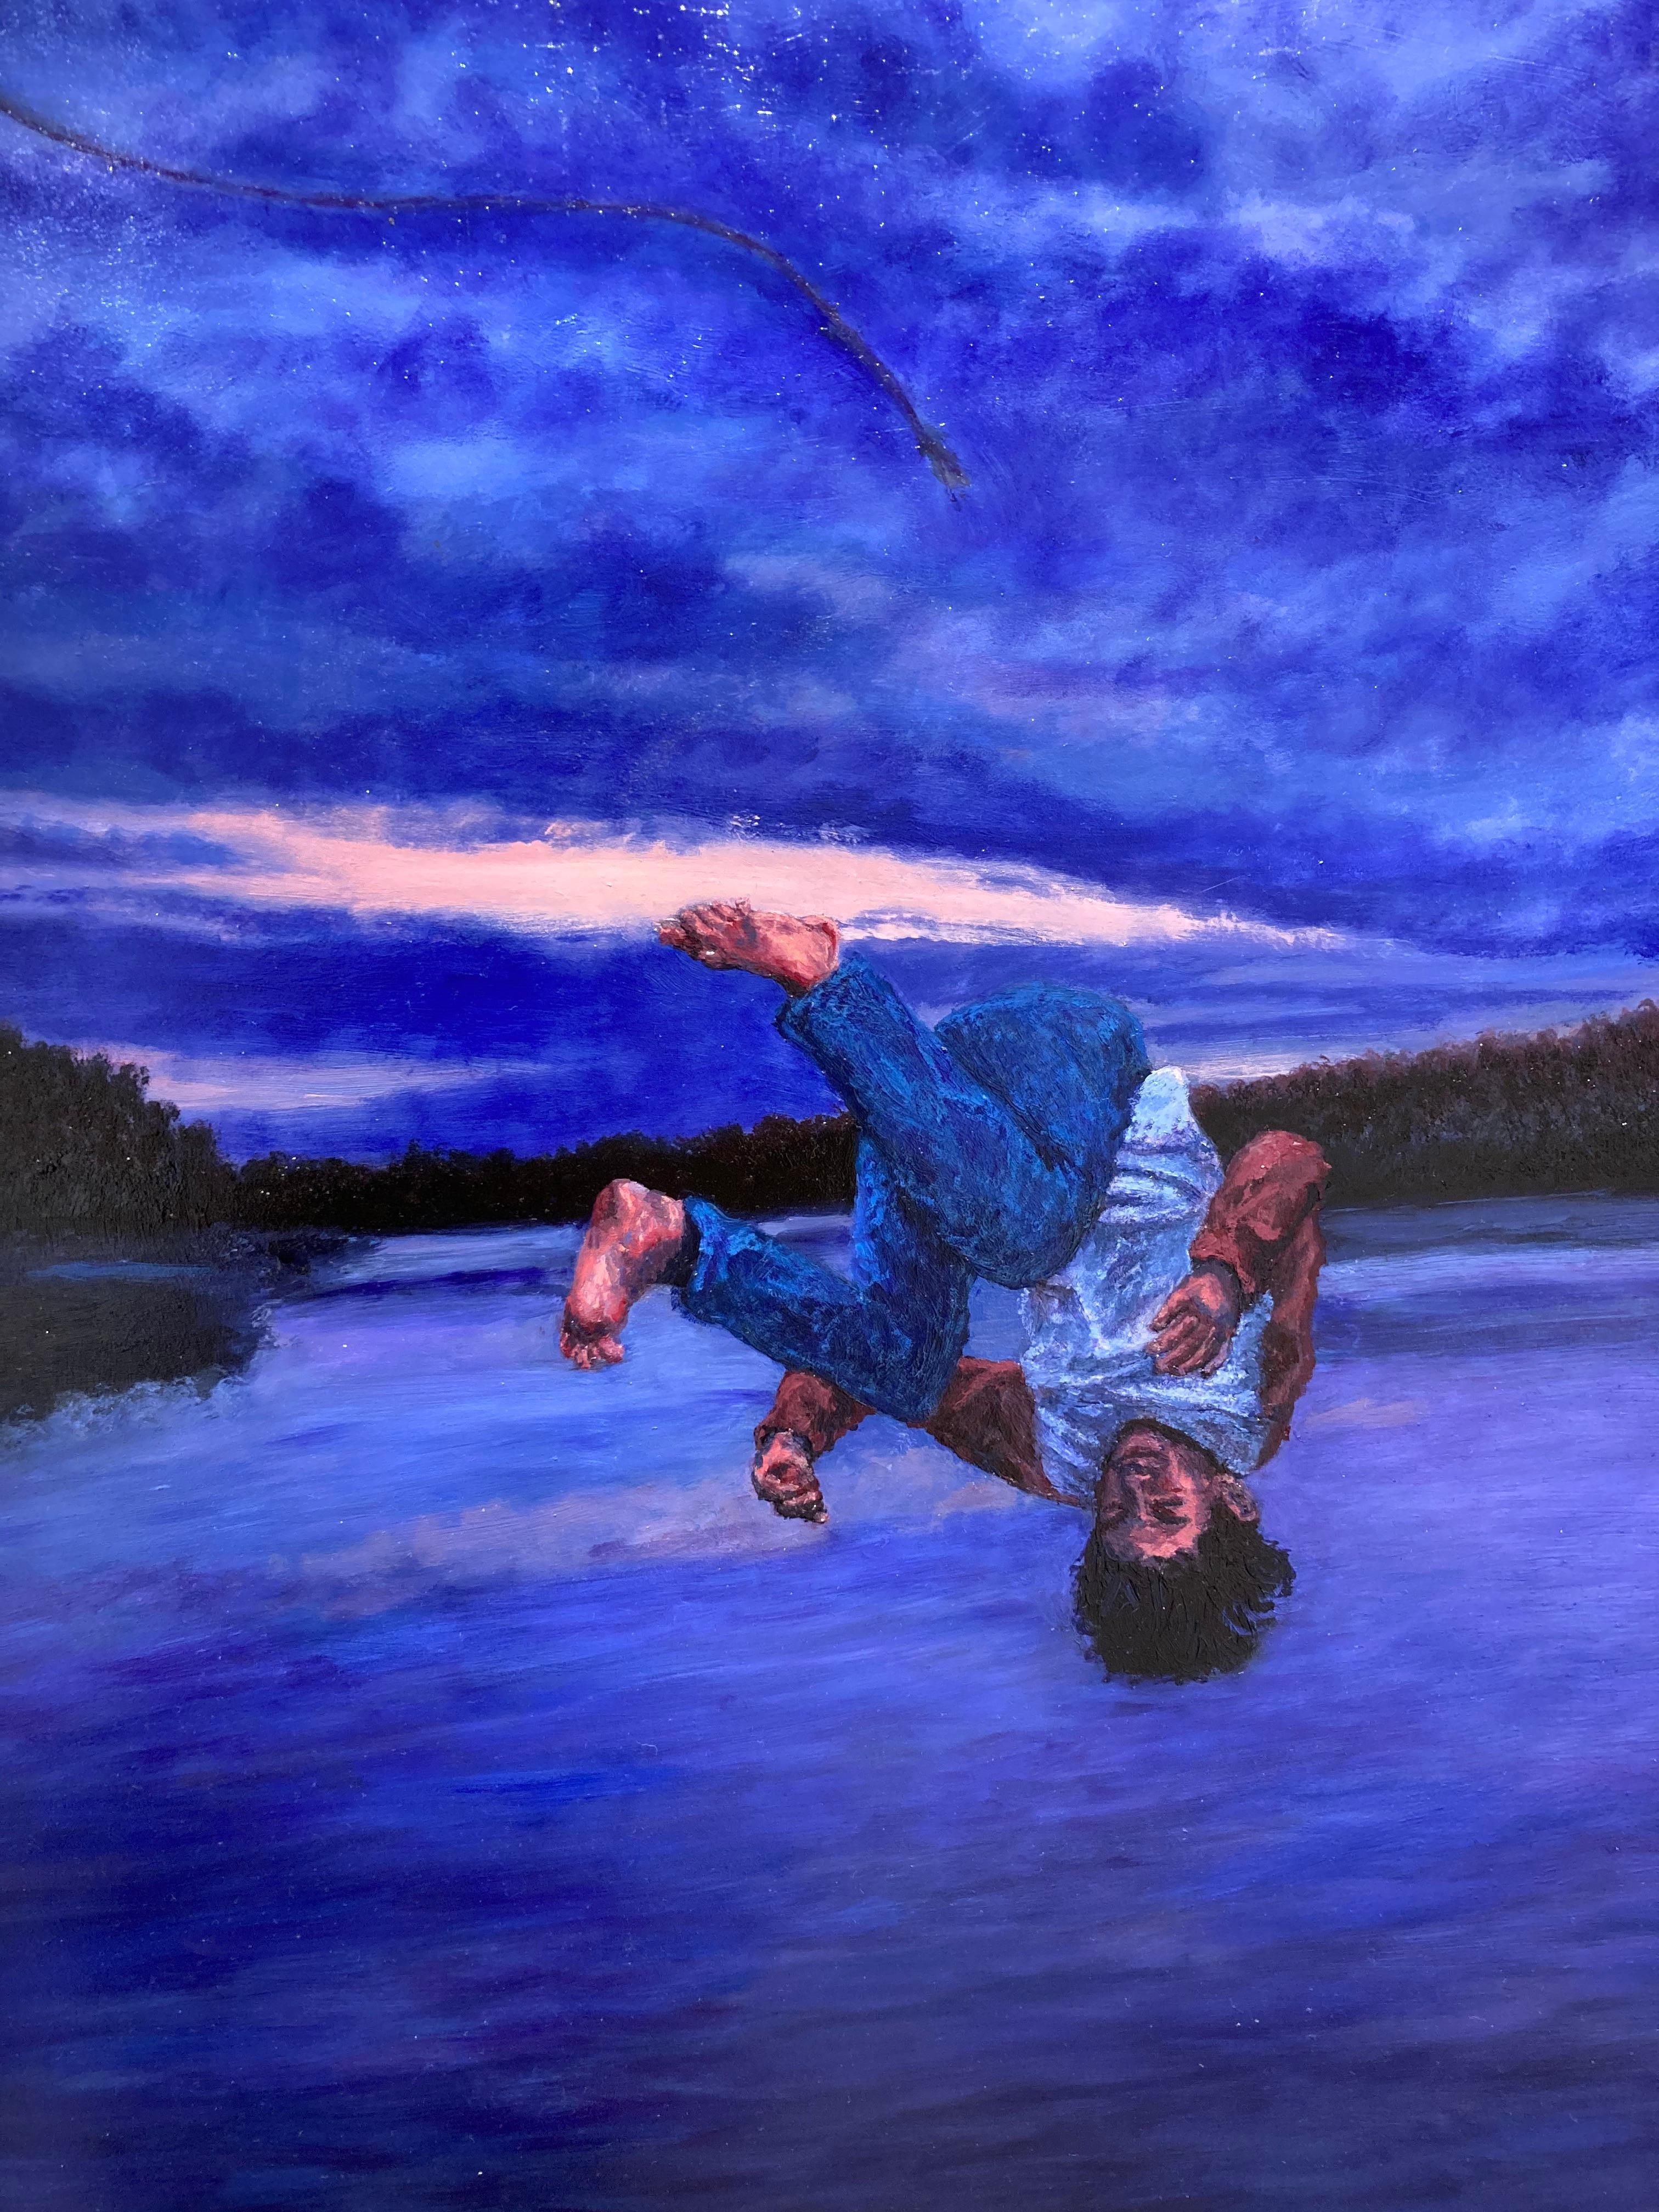 Whimsical figurative painting of a young boy jumping into a purple blue lake landscape at twilight
